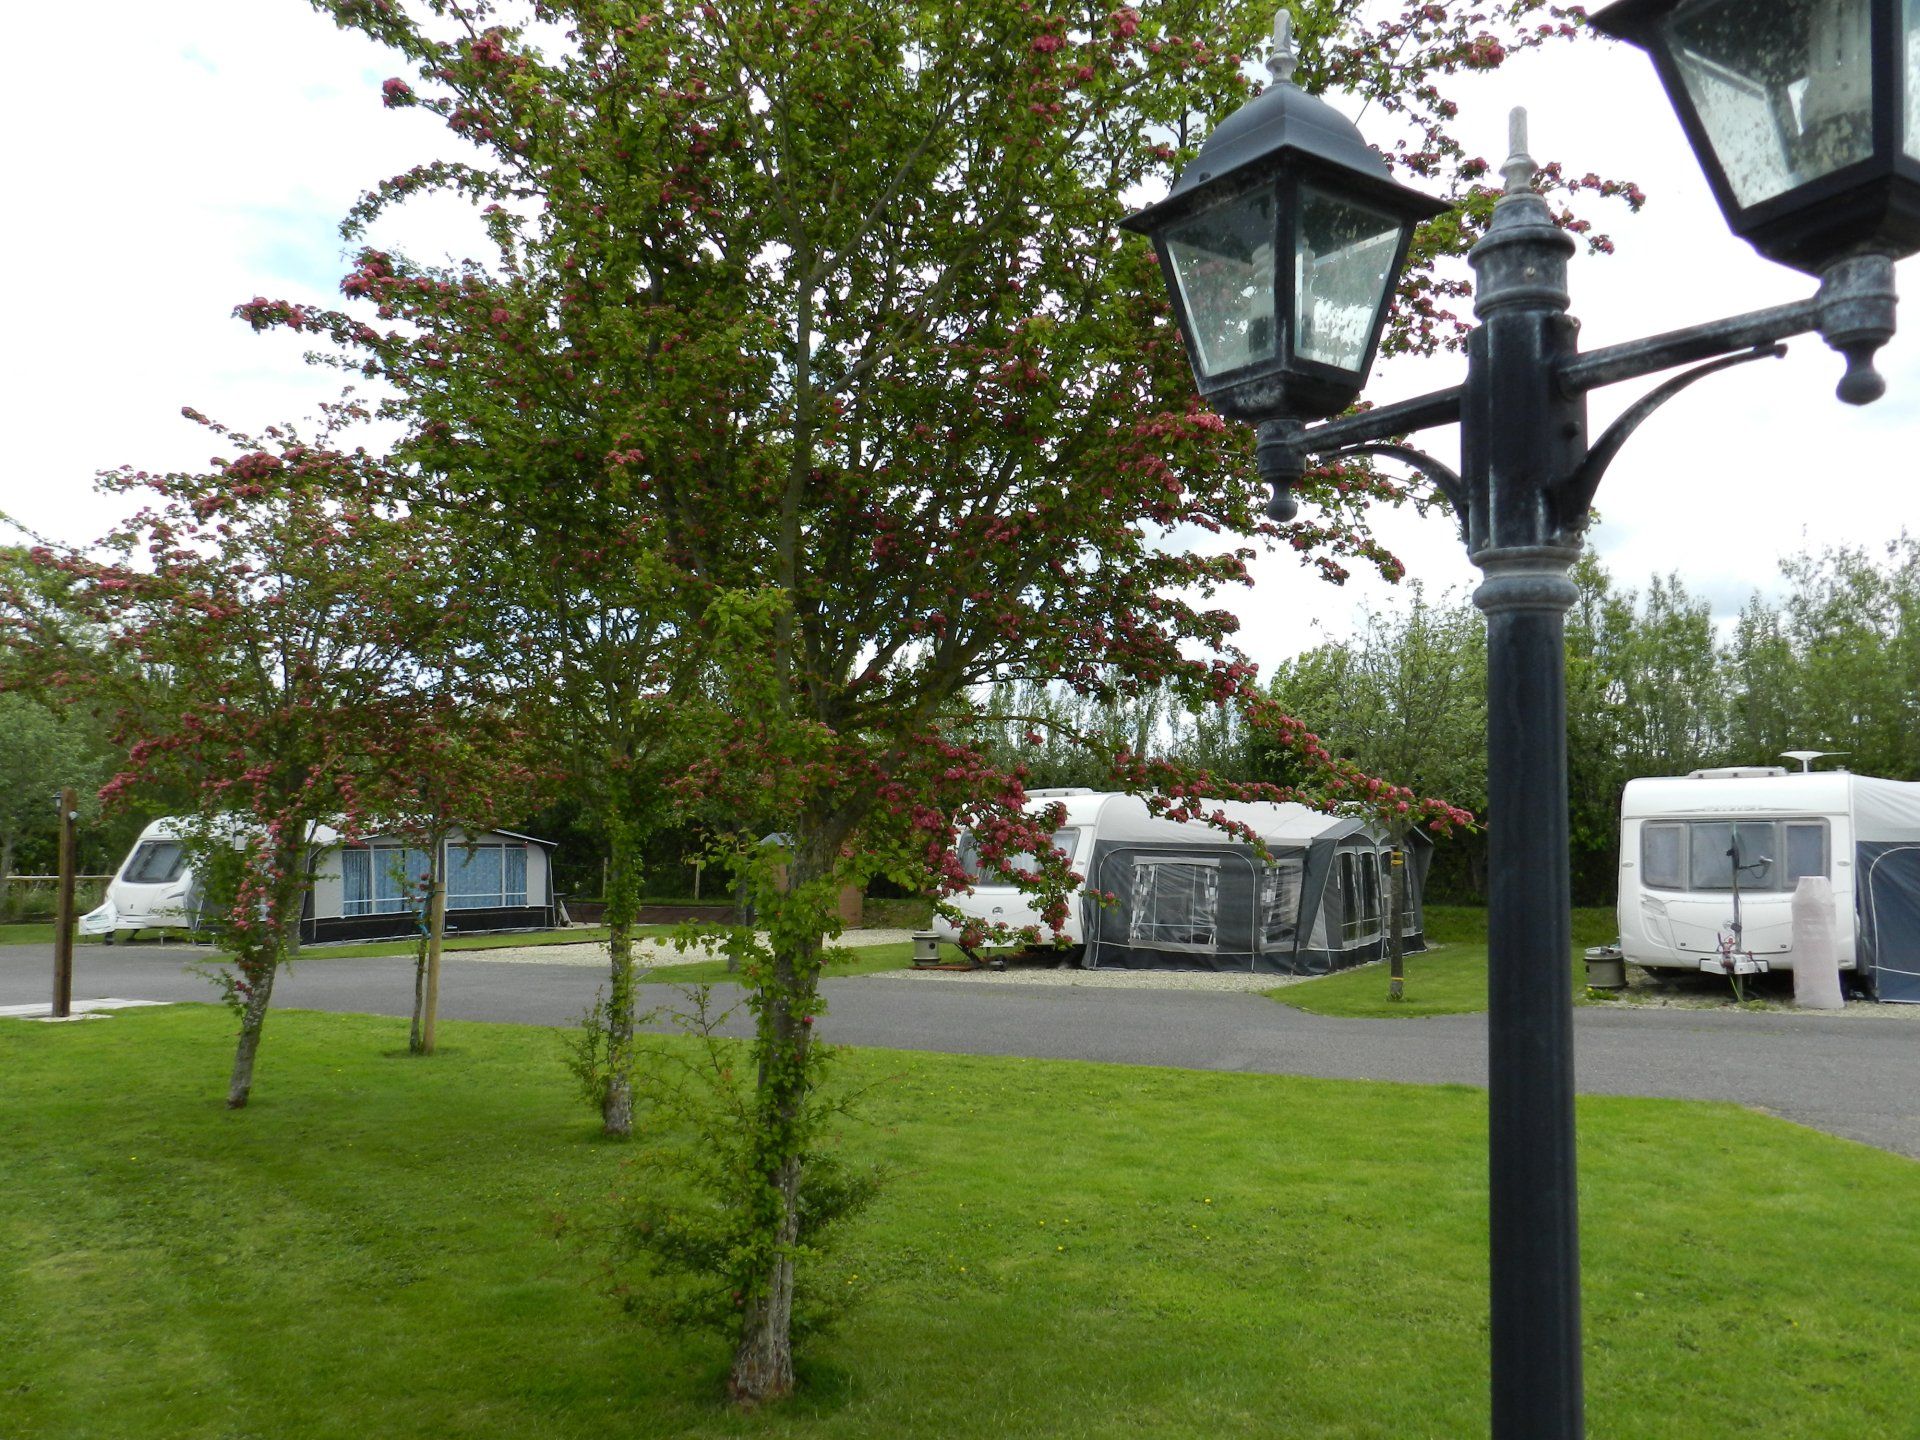 Caravans with awnings at Coombes Cider Farm